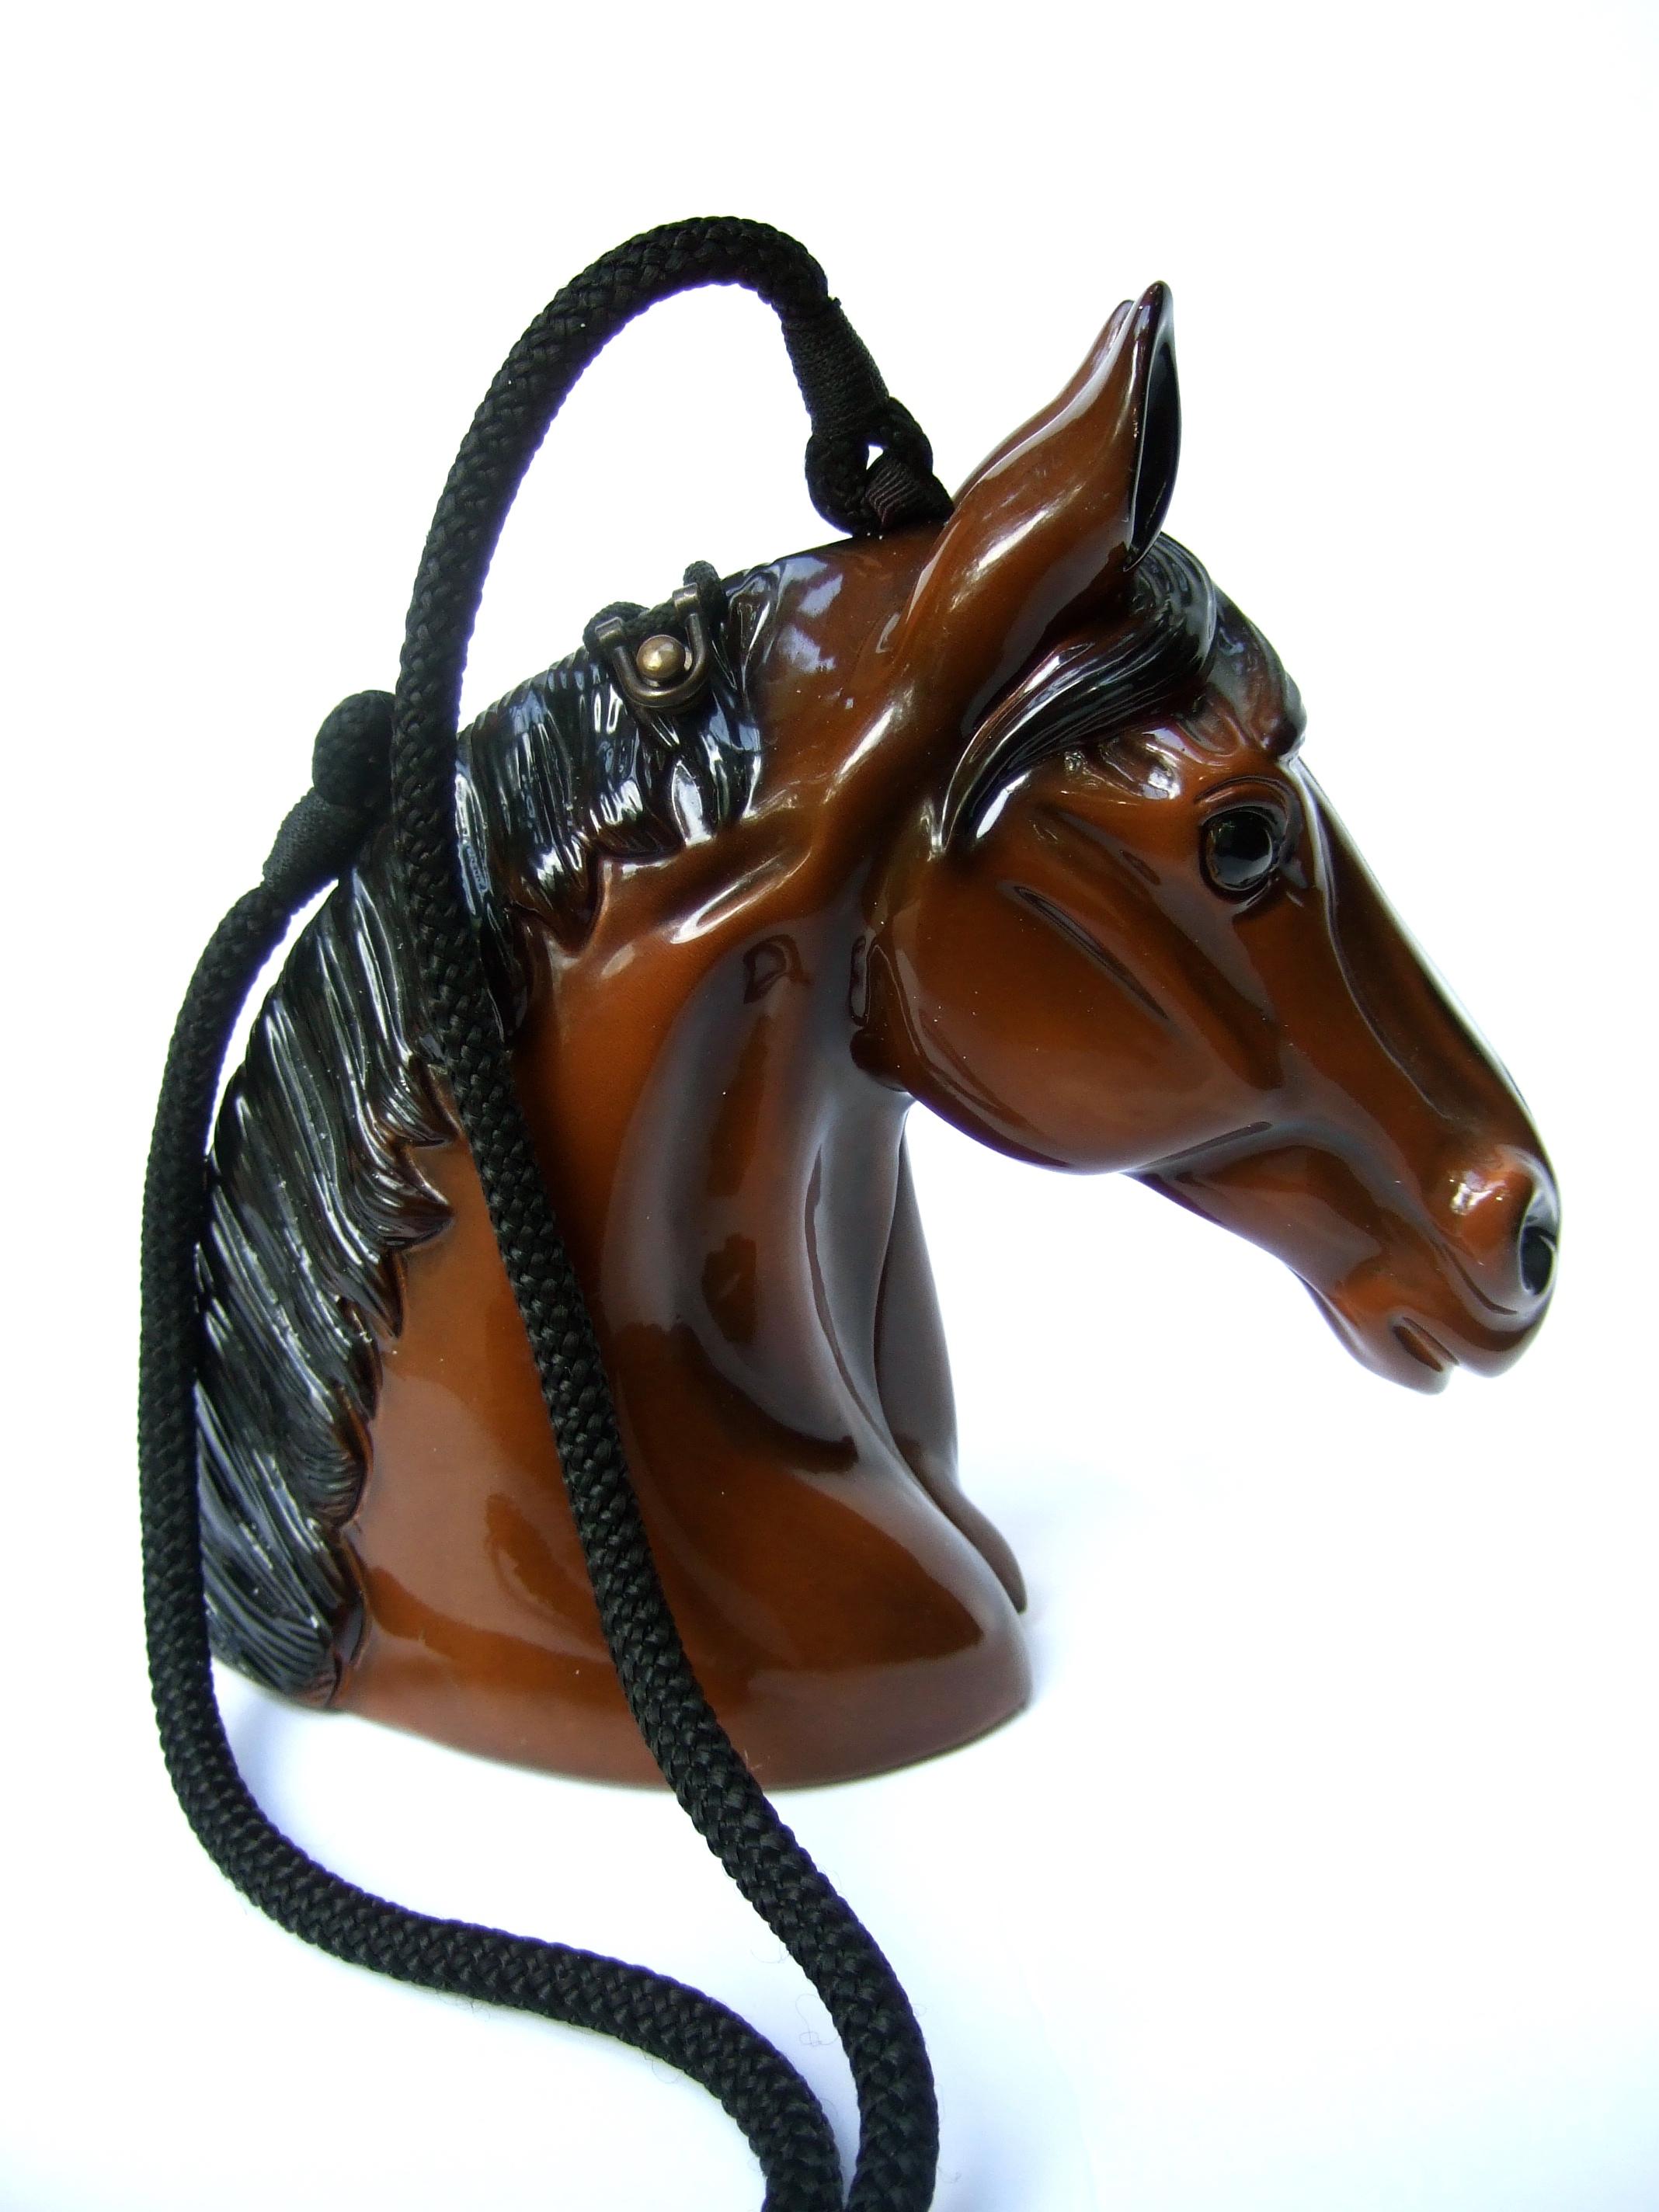 Timmy Woods Beverly Hills hand carved wood equine artisan shoulder bag c 1990s
The unique wood horse head is sheathed in glossy brown enamel lacquer 
The mane is distinguished with black enamel with a white enamel streak 
running down the horses'